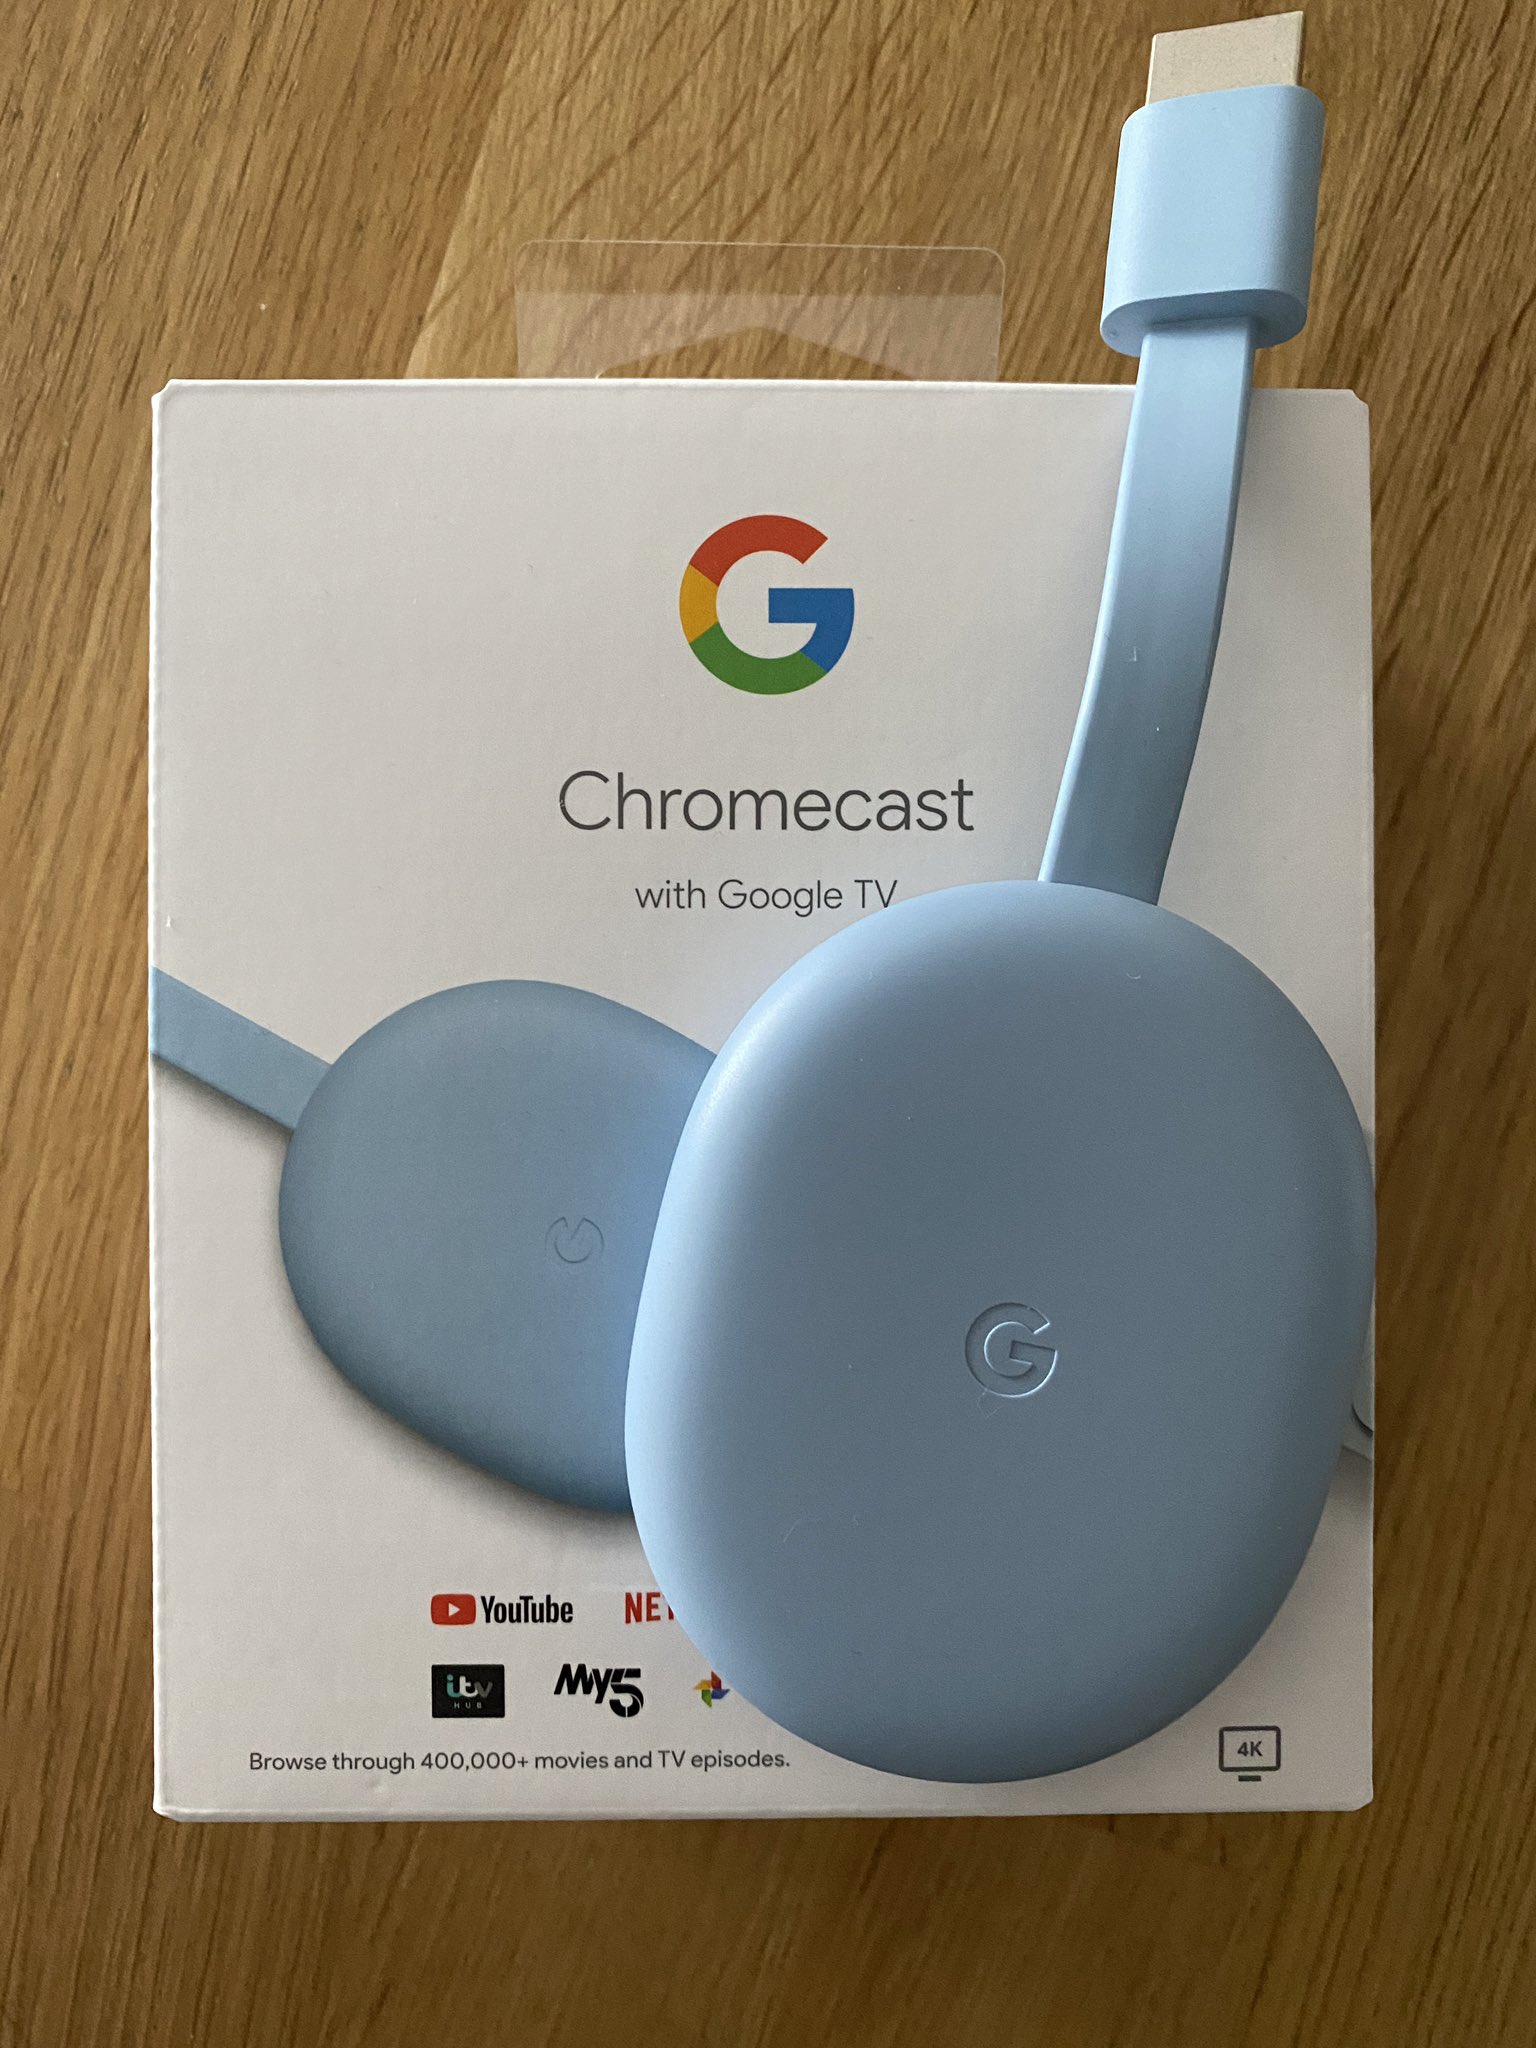 Tom Warren on "I was hoping to demo xCloud the new Chromecast, but it's running really strange for me. I keep getting (despite 5Ghz WiFi) and the app freezing